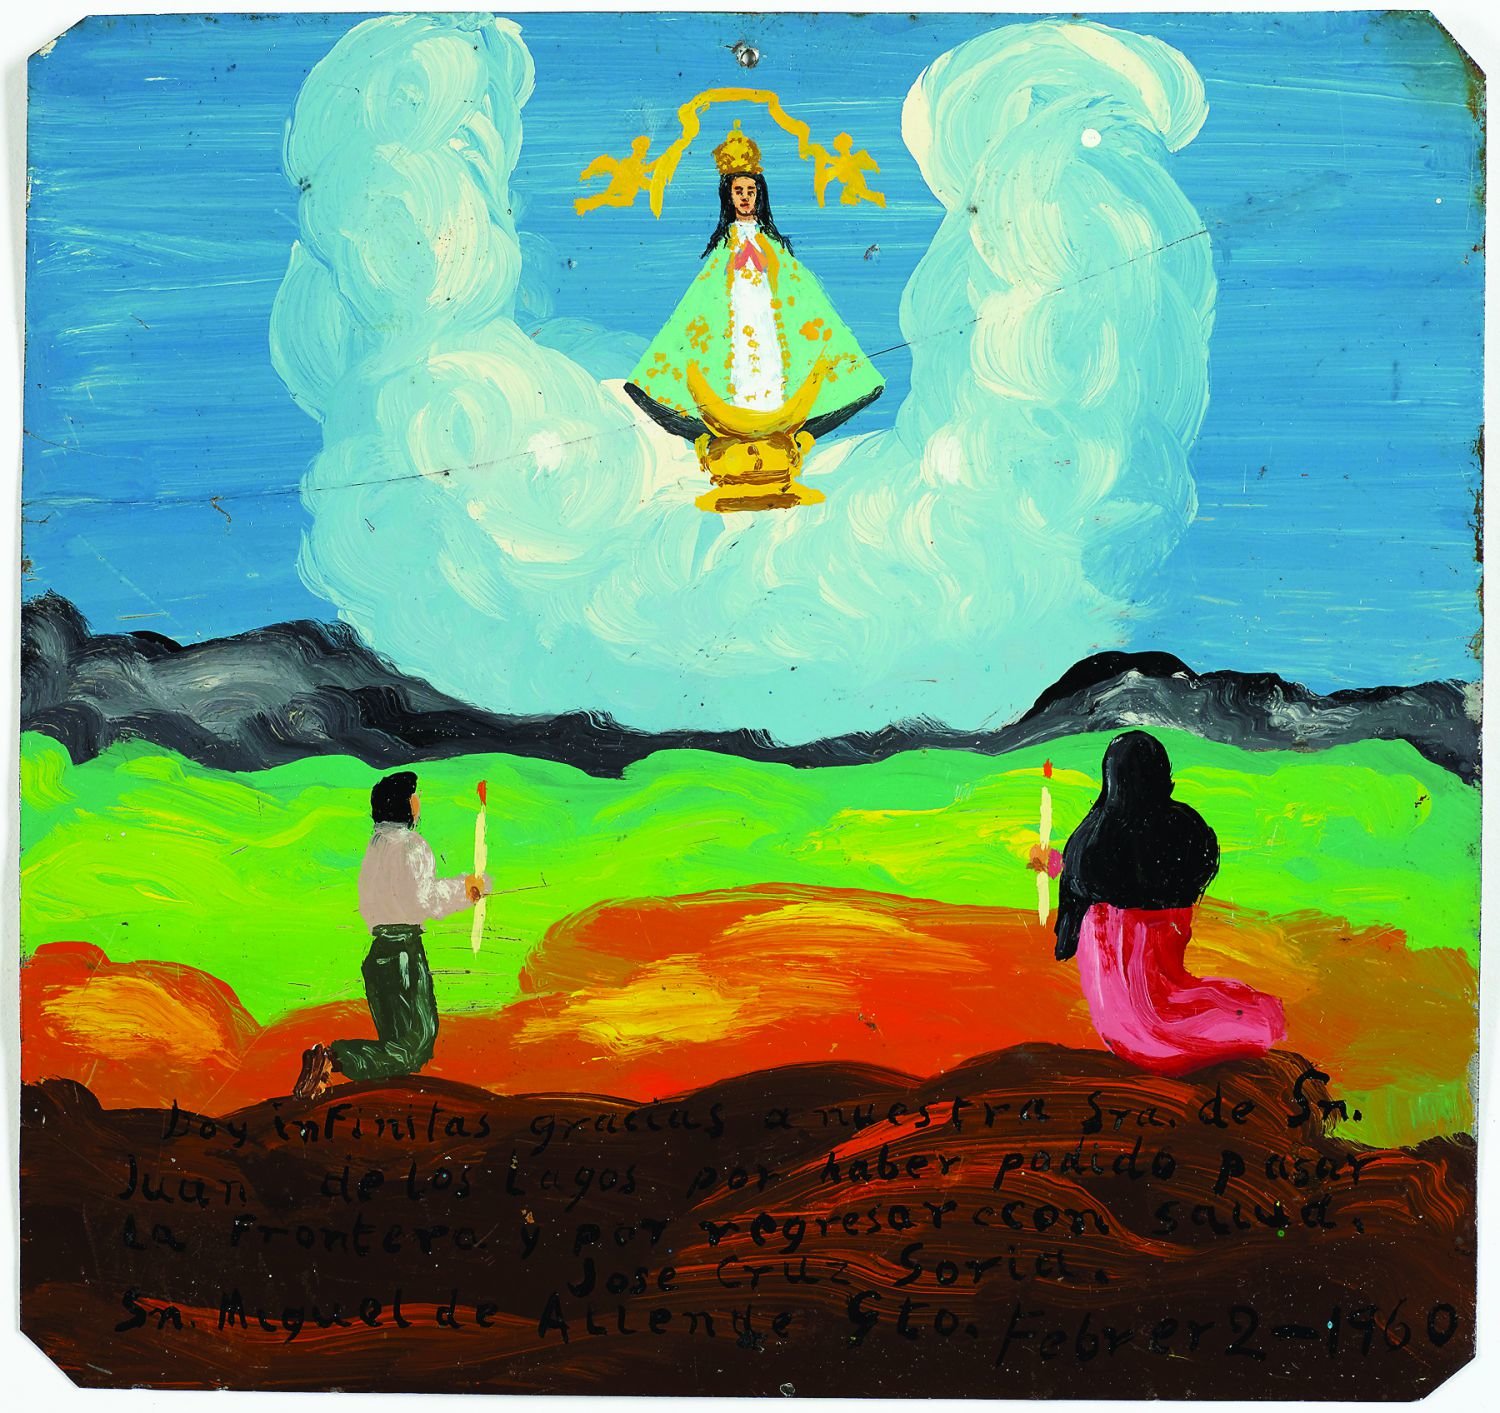 “Retablo of José Cruz Soria,” 1960, is an oil on metal, from the Arias-Durand Collection.